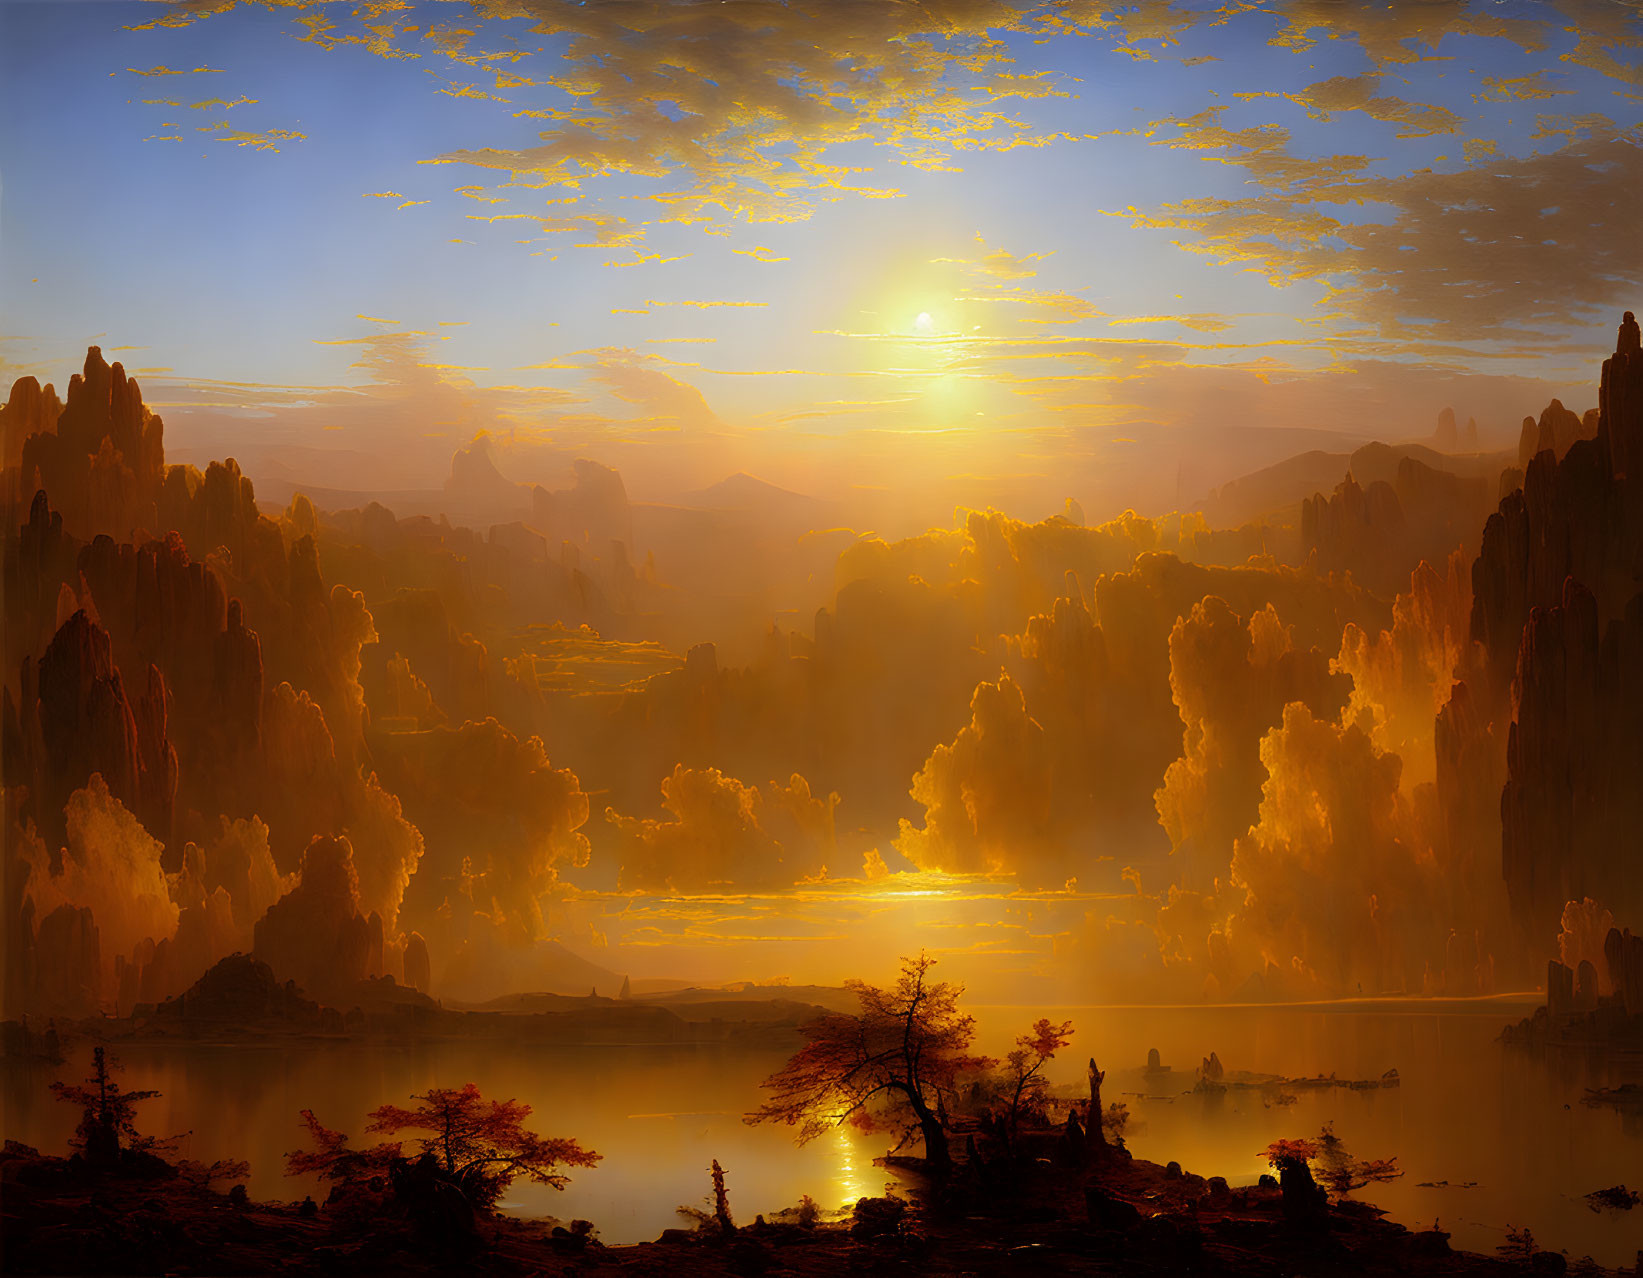 Golden sunrise over tranquil lake with towering cliffs and silhouetted figures